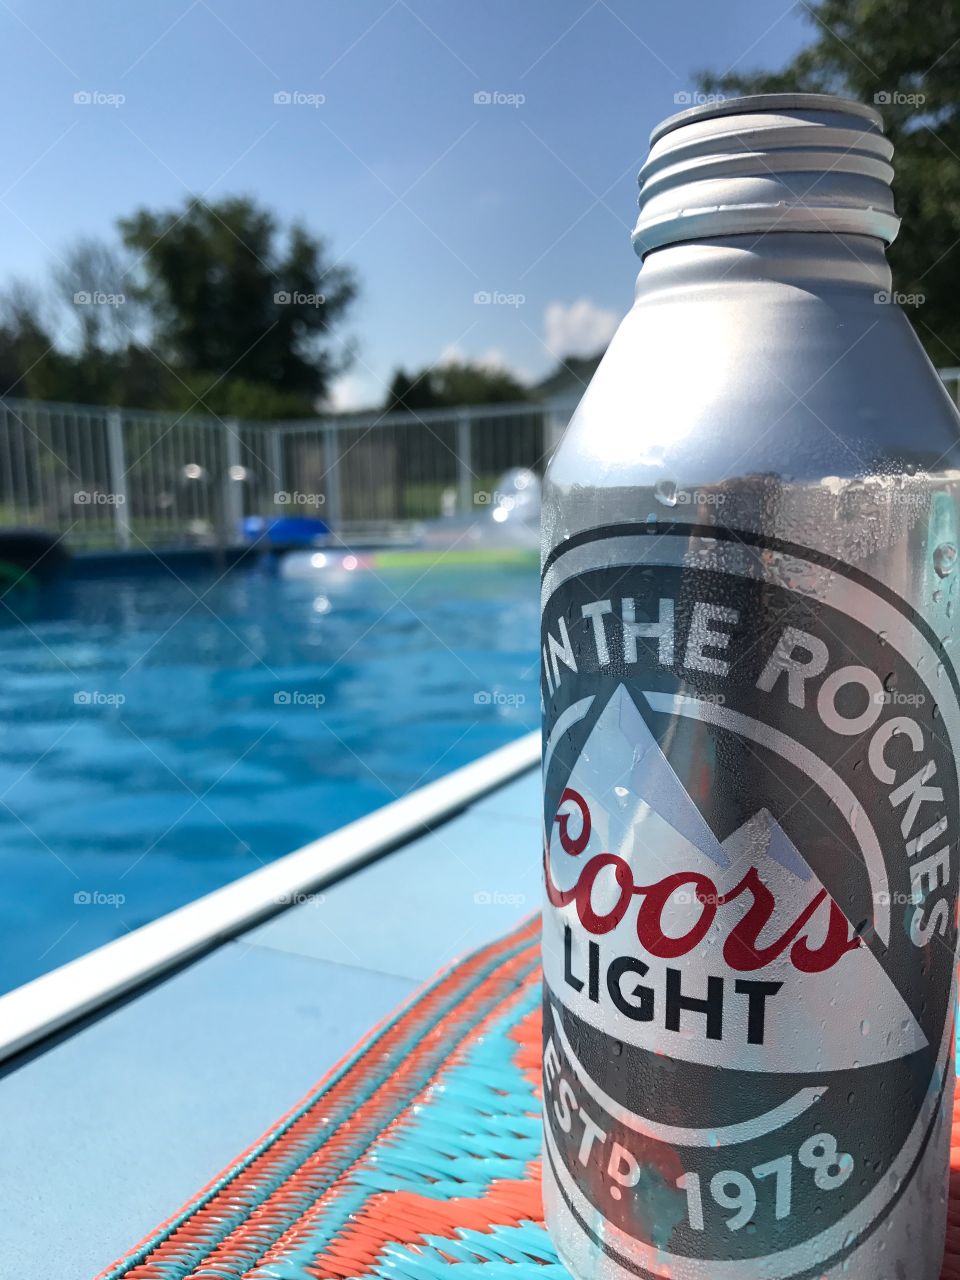 Bottle of Coors Light beer sitting by swimming pool